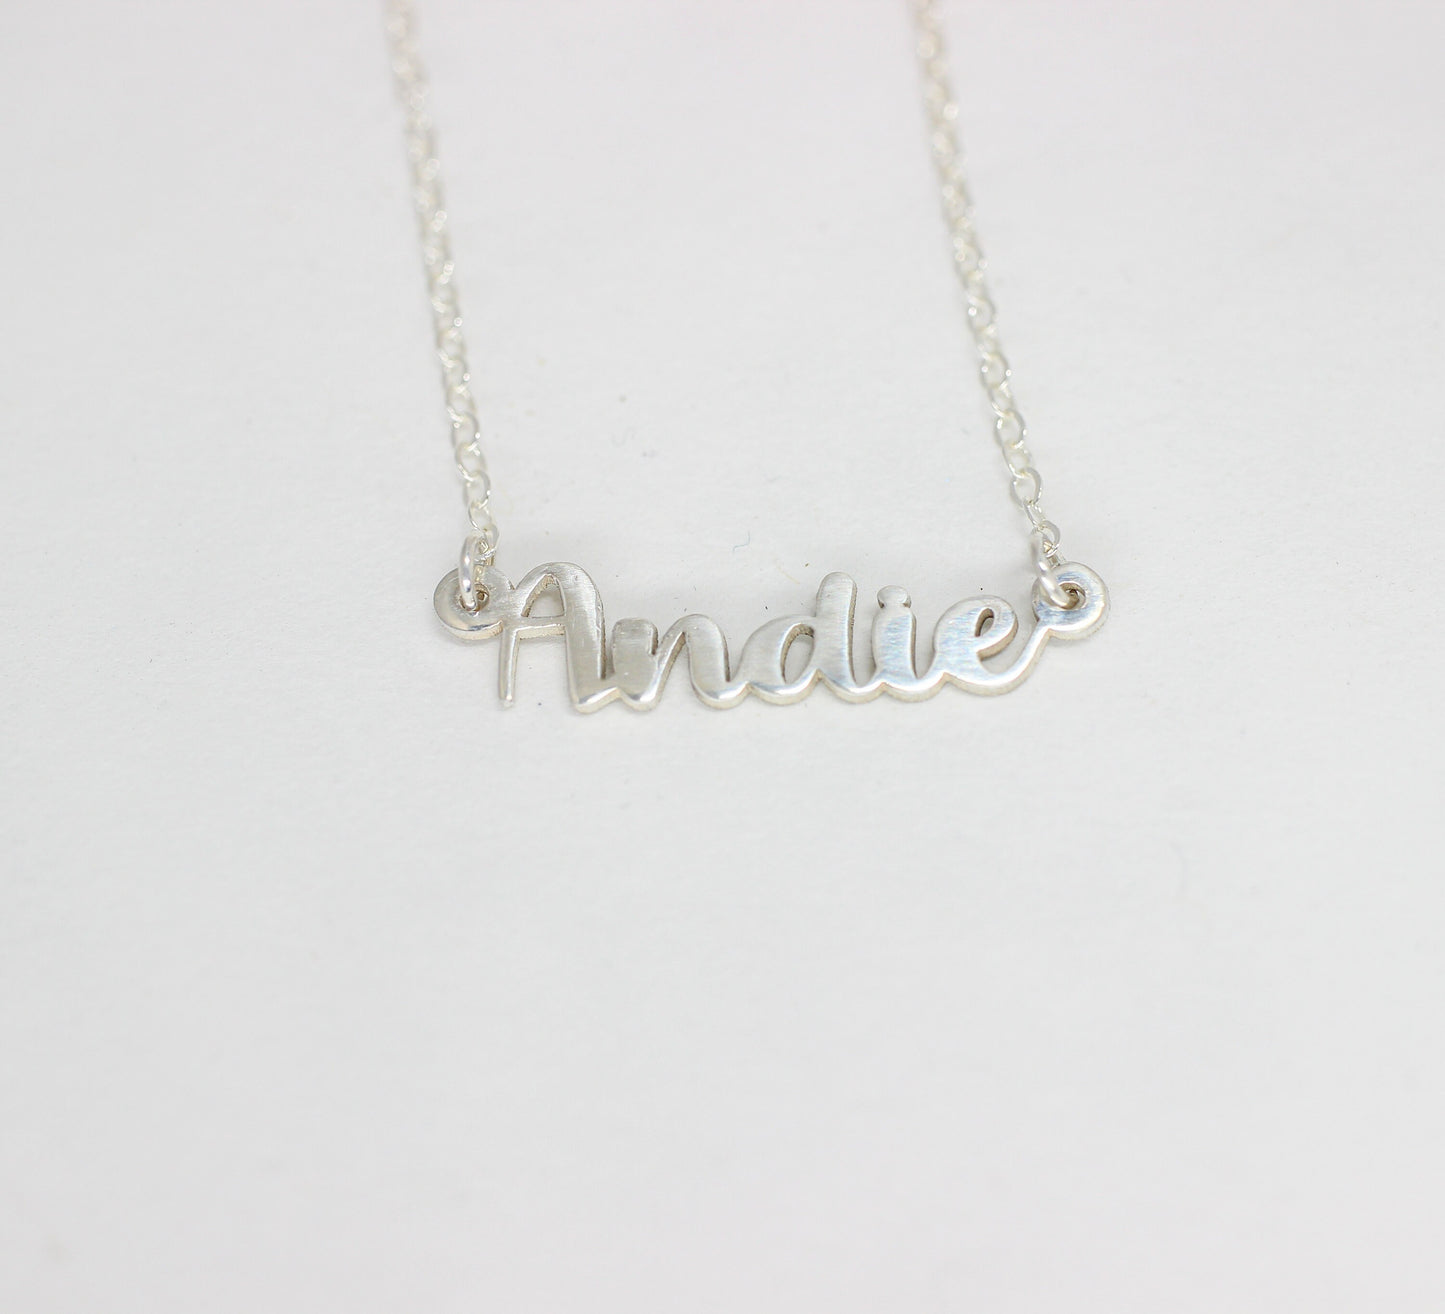 Personalized Name Necklace // Sterling Silver Word Necklace // Custom Personalized Jewelry Christmas Gift for Her